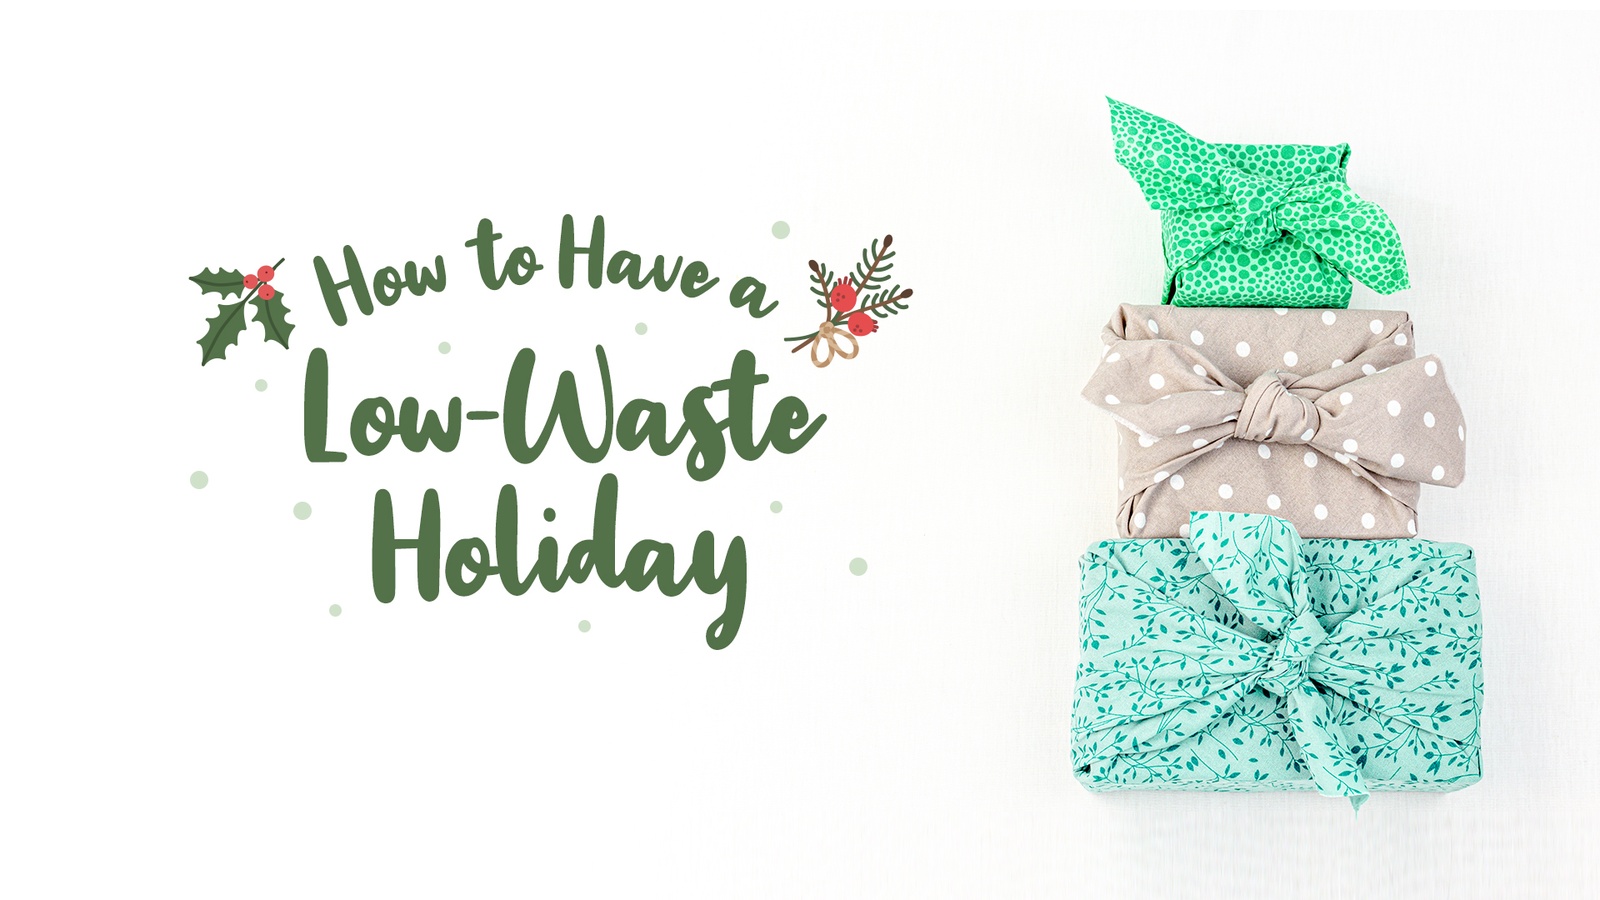 How to Have a Low-Waste Holiday